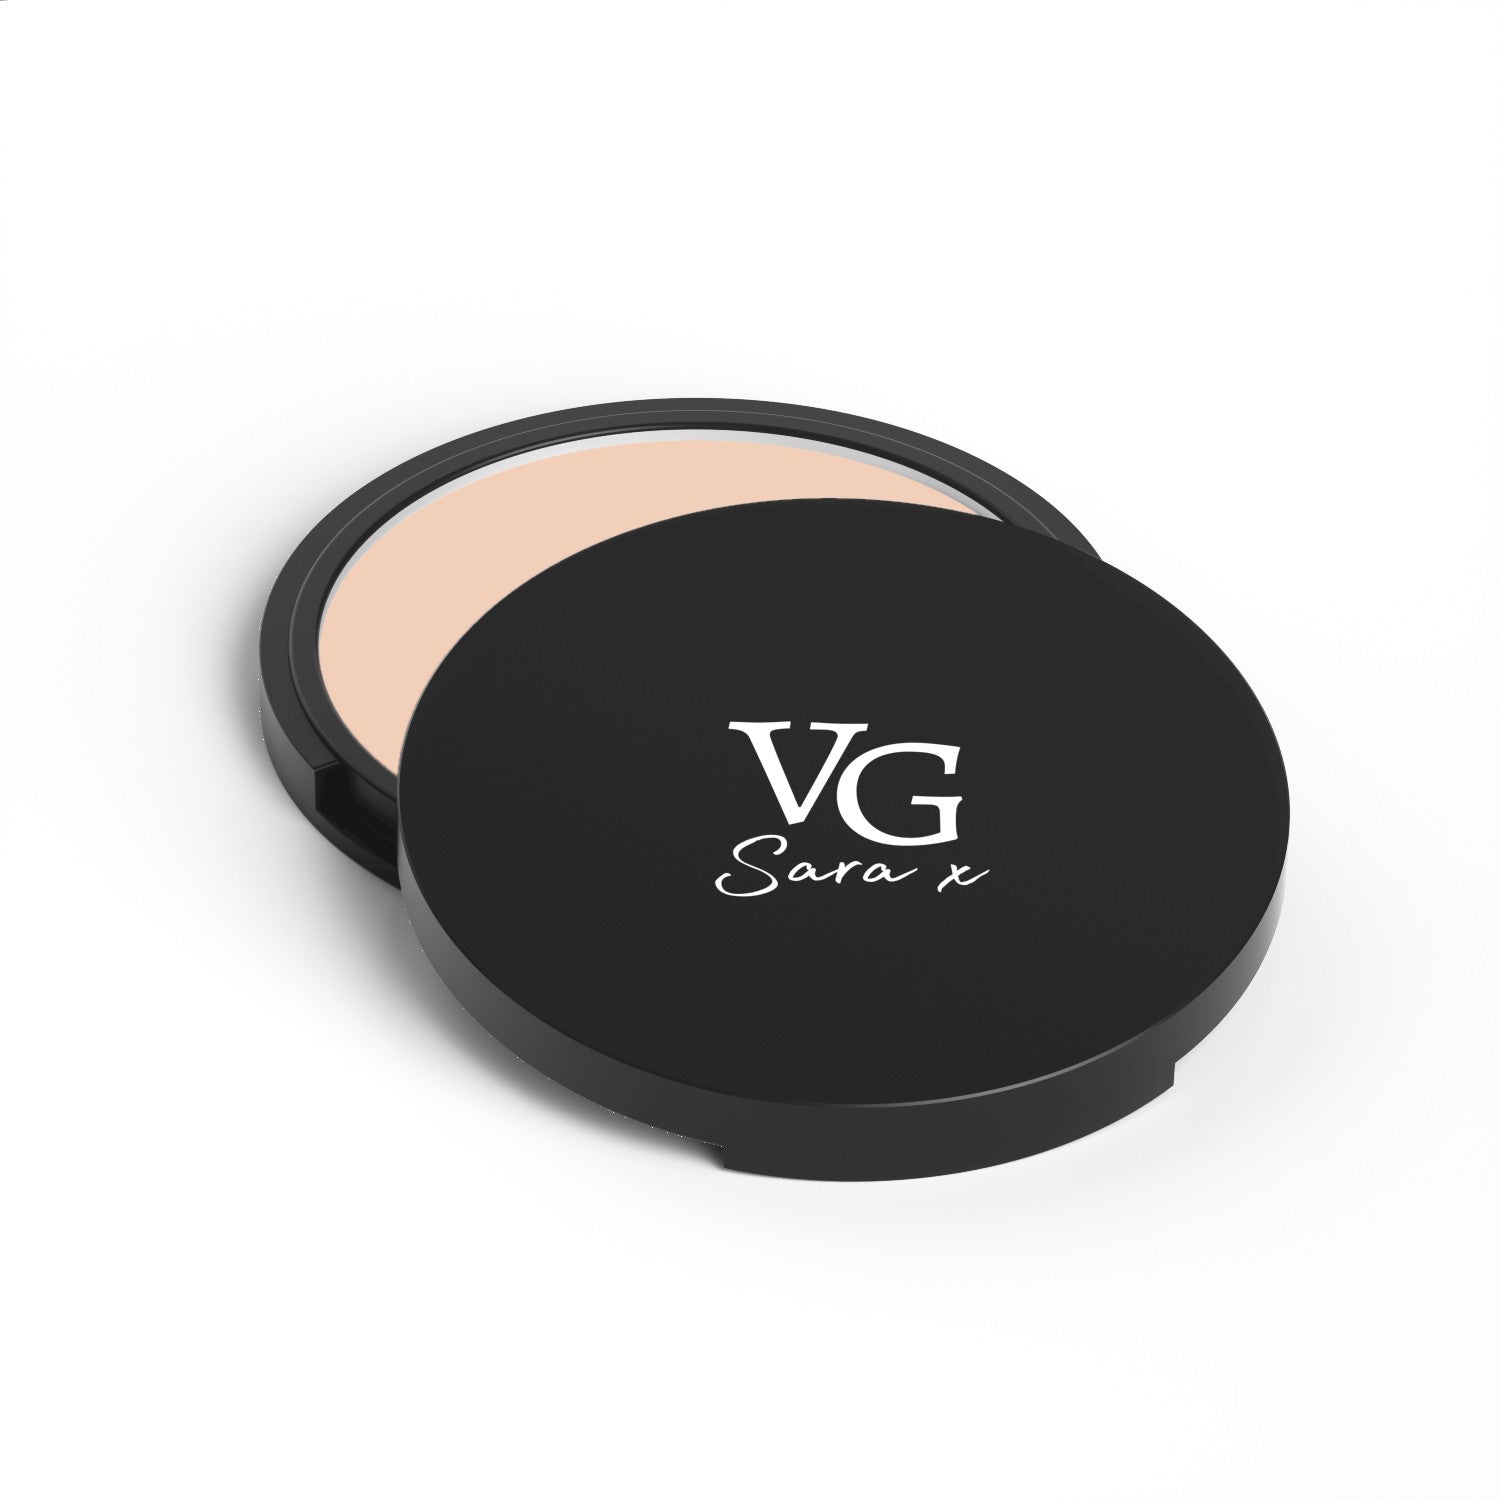 container of a bronzer cream with the logo of a top brand called Vg sara x